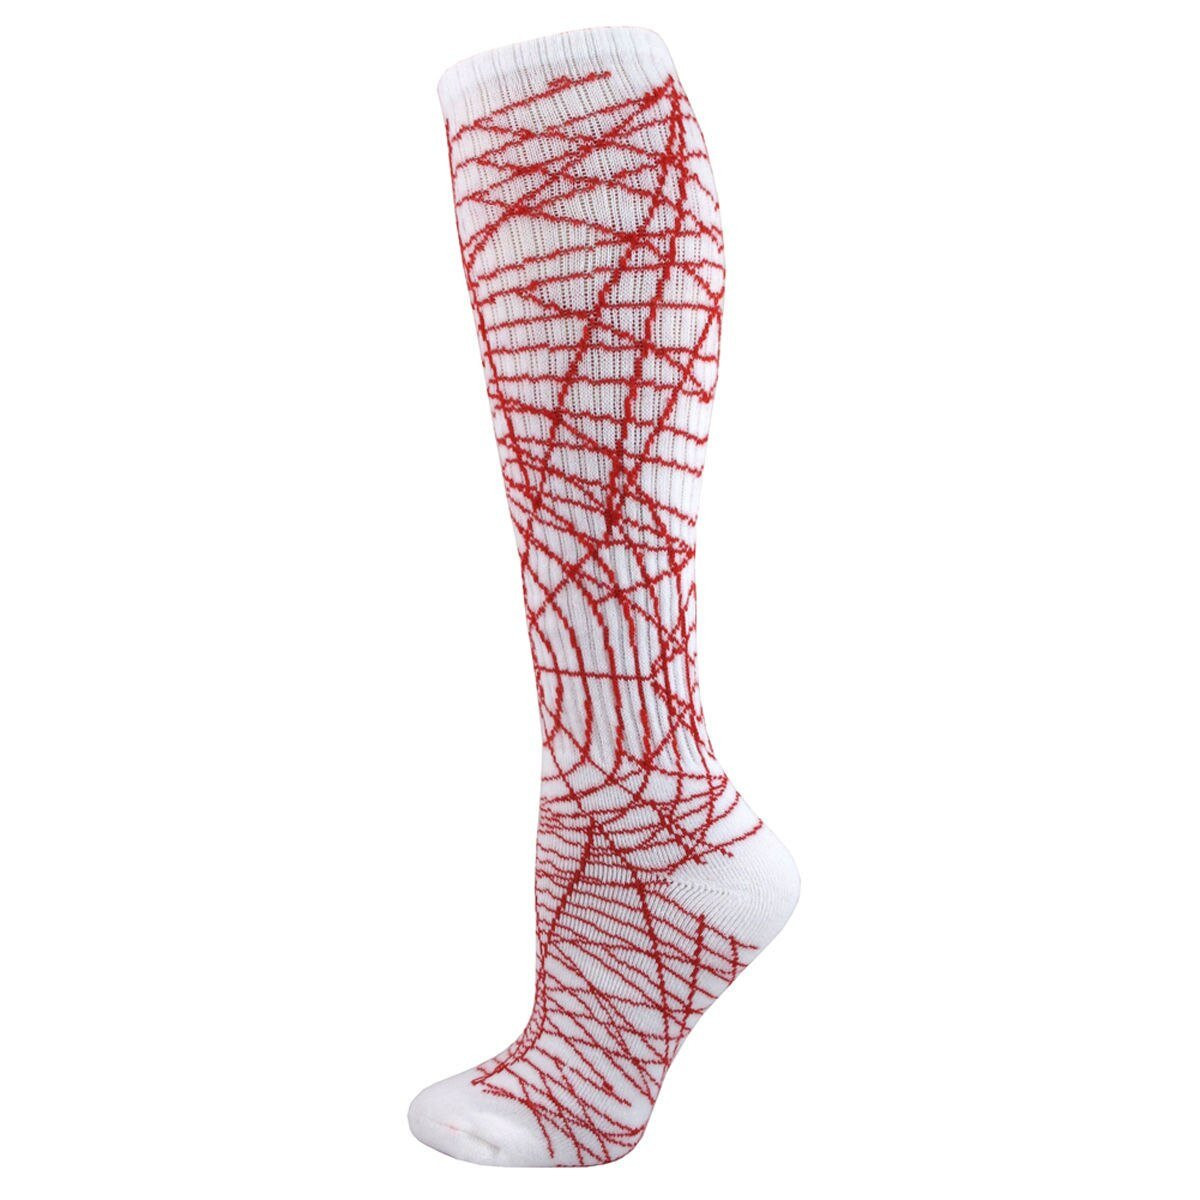 Spider Knee High Sports Socks - White Red - Small